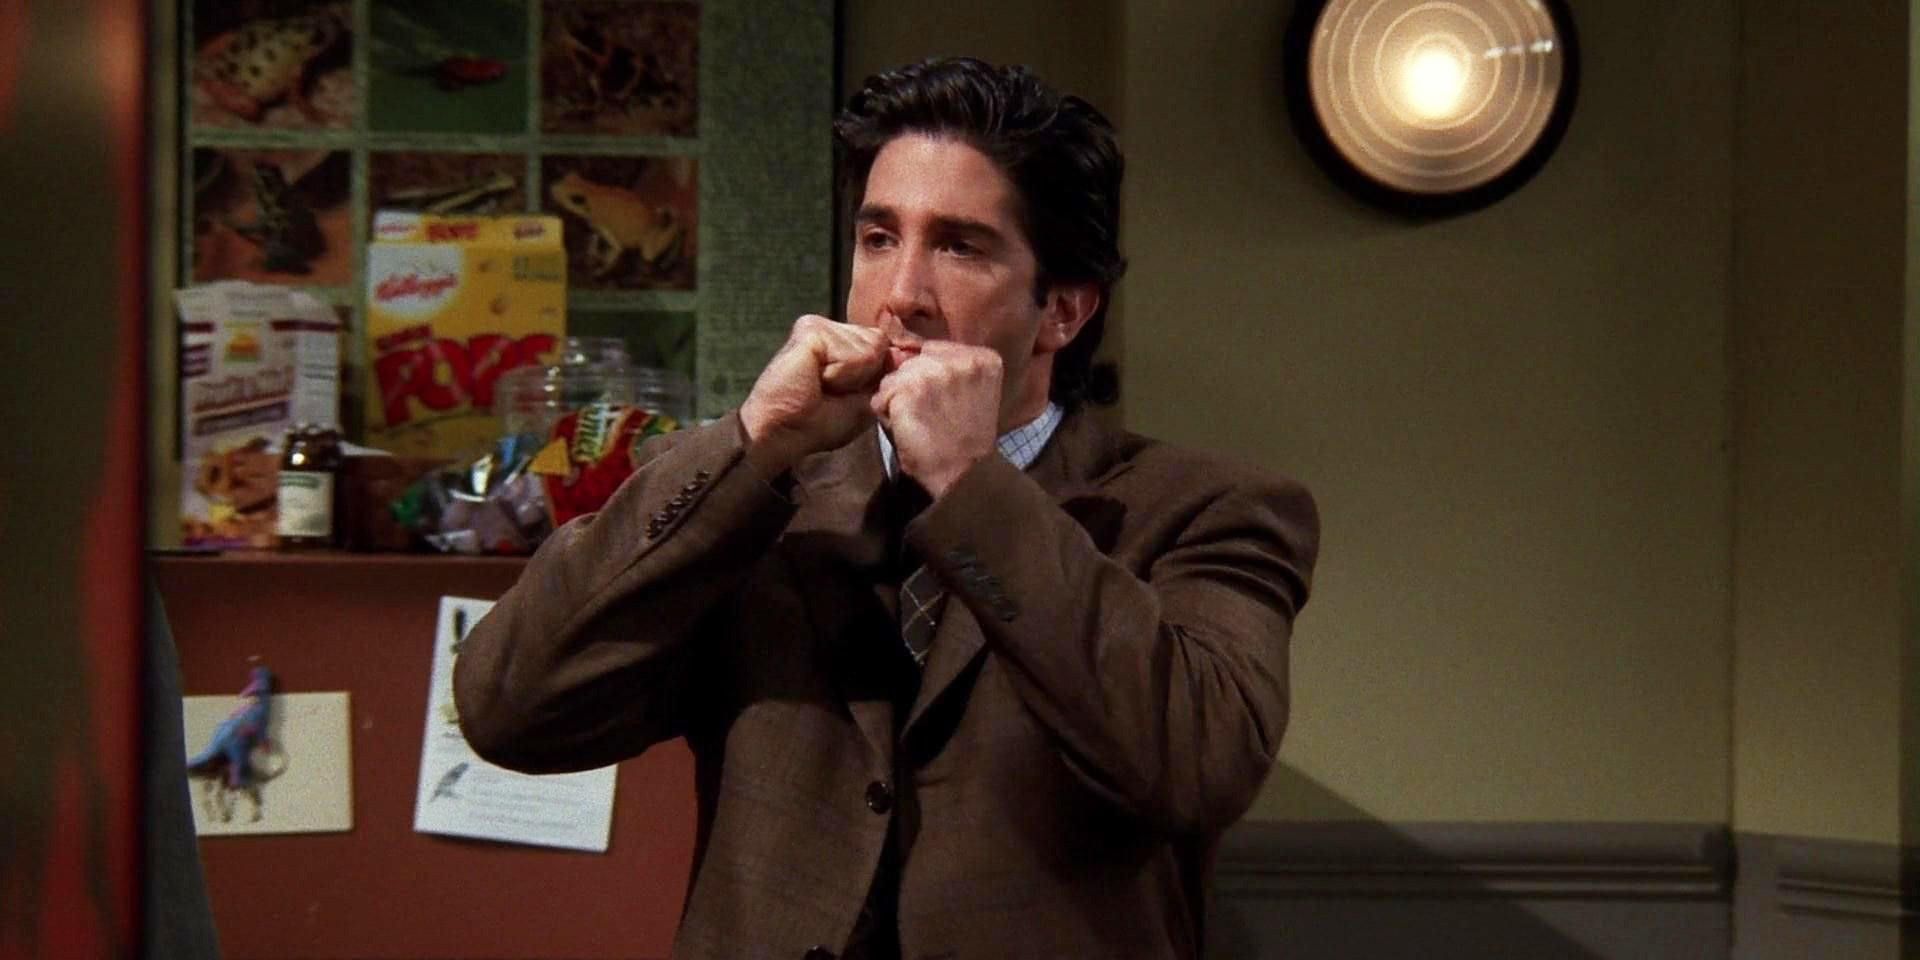 The 15 Best Episodes Of Friends Ever According To IMDb